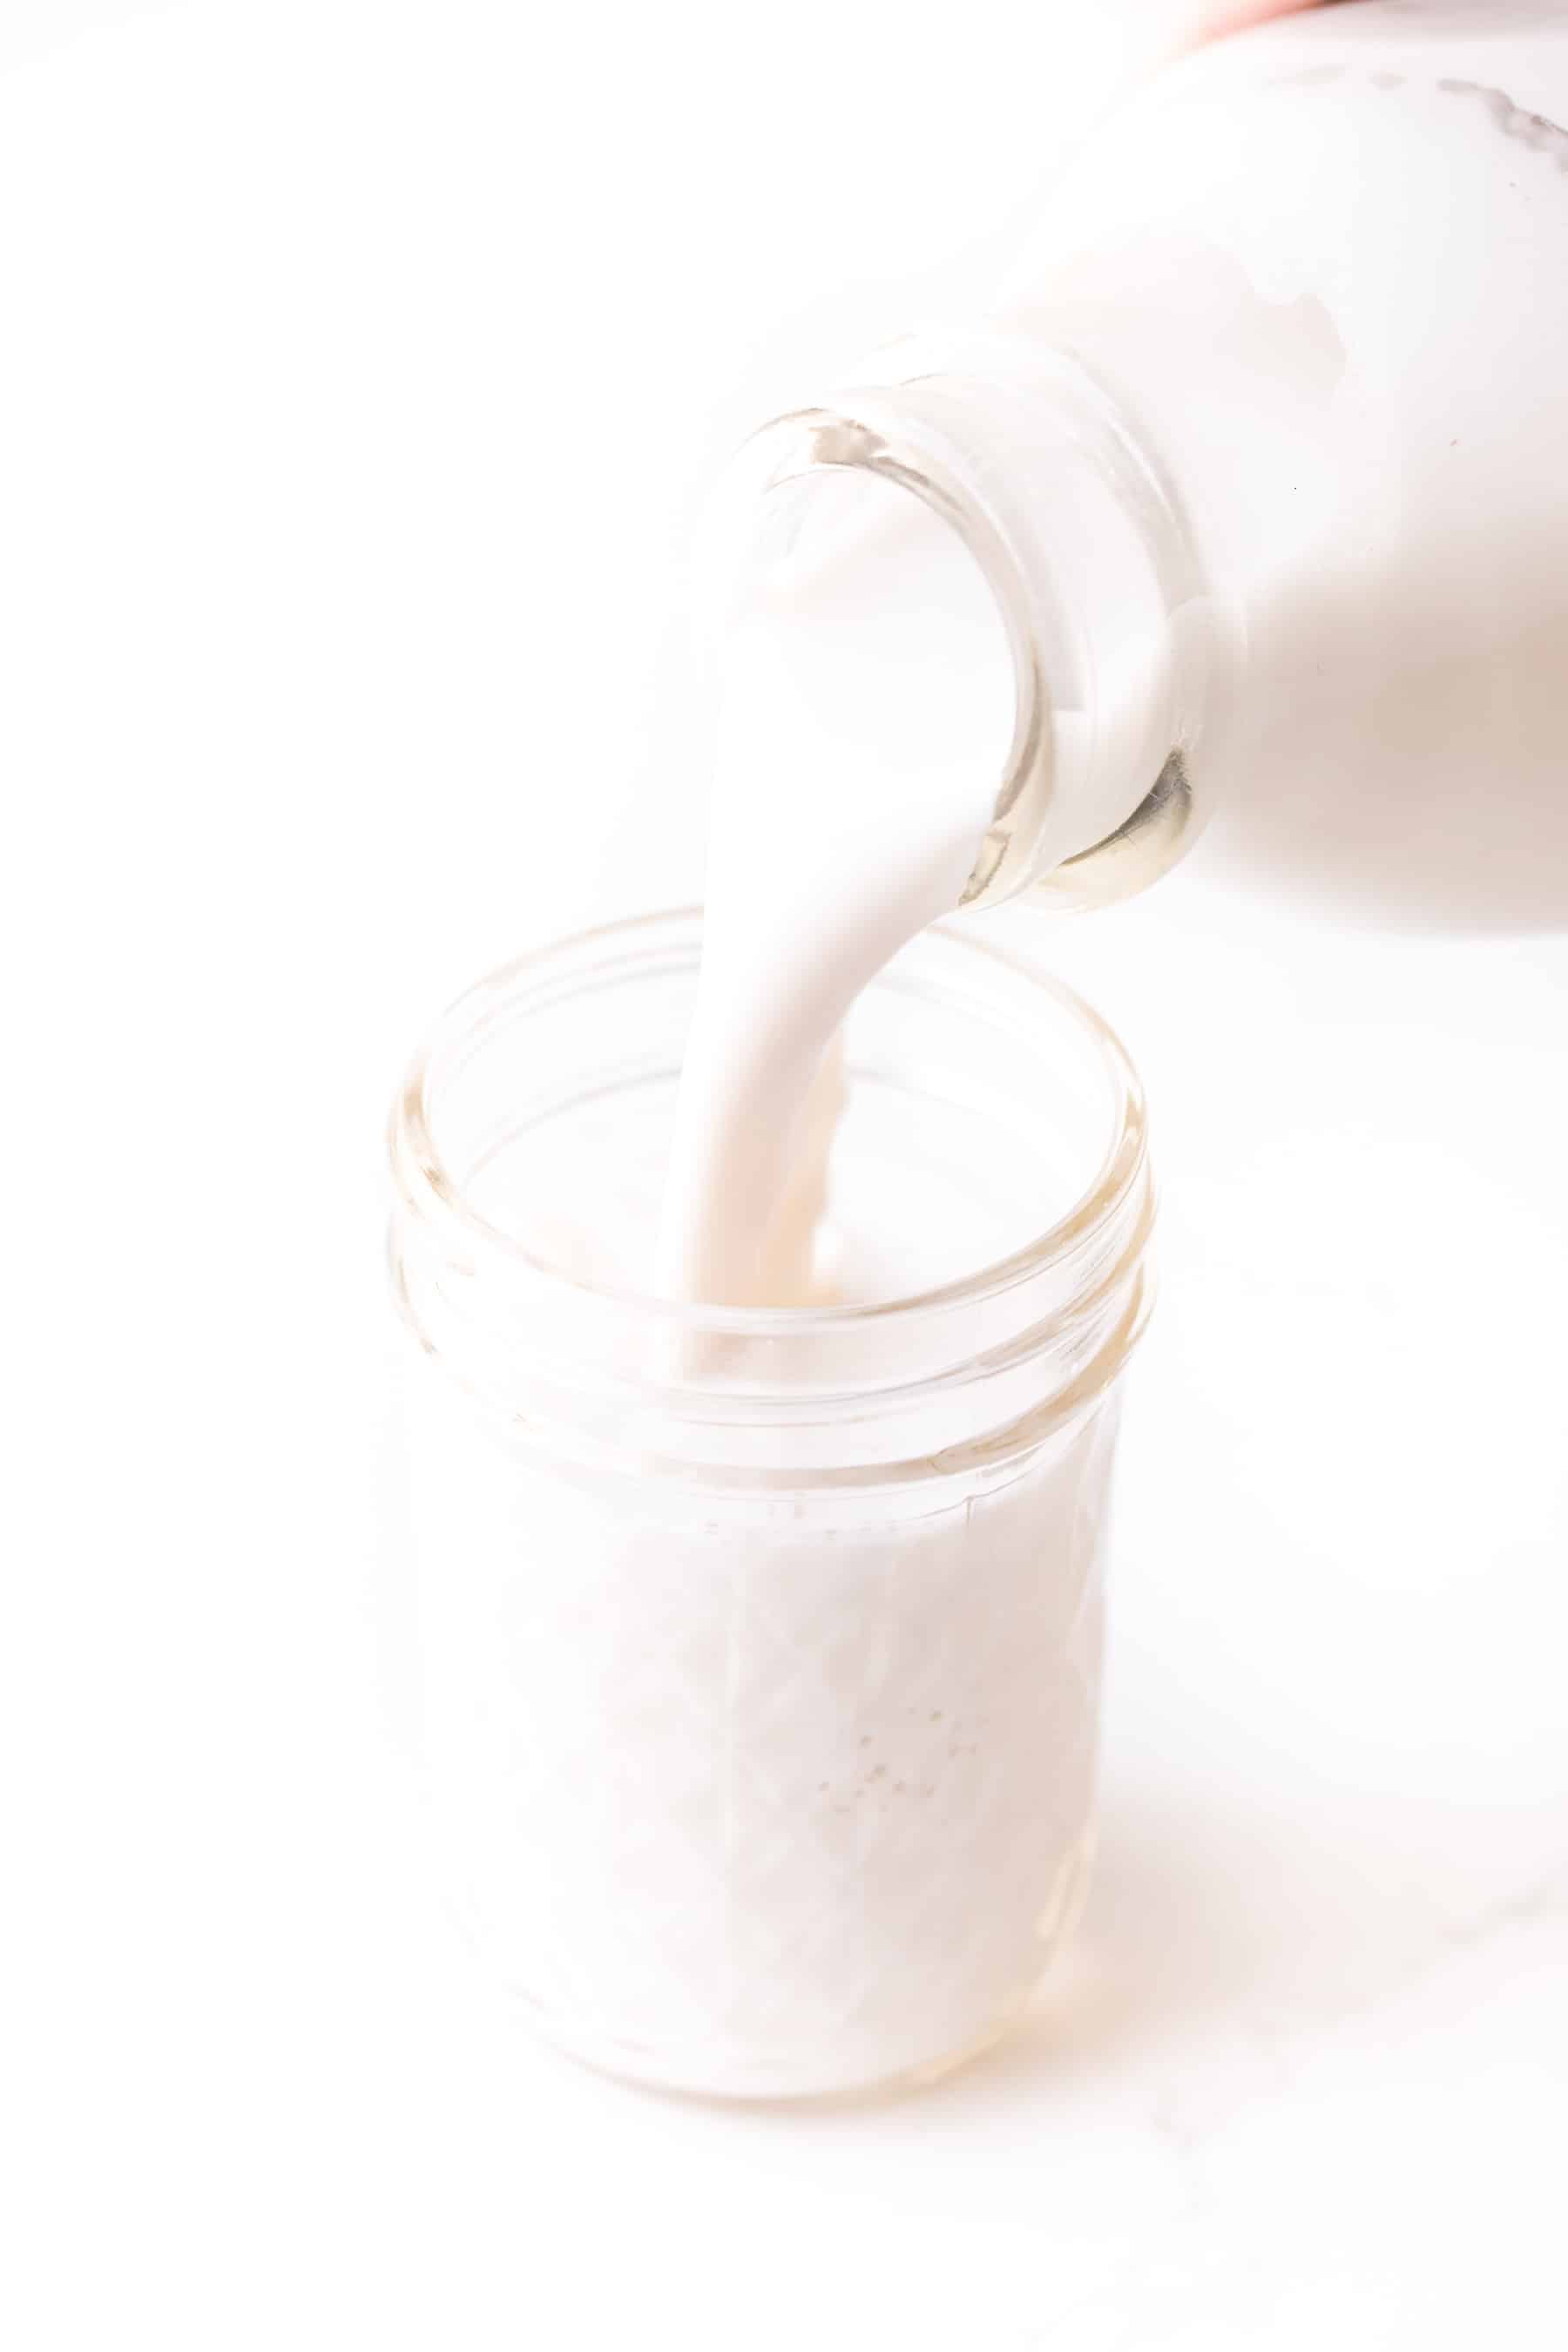 Almond milk being poured into a jar on a white background